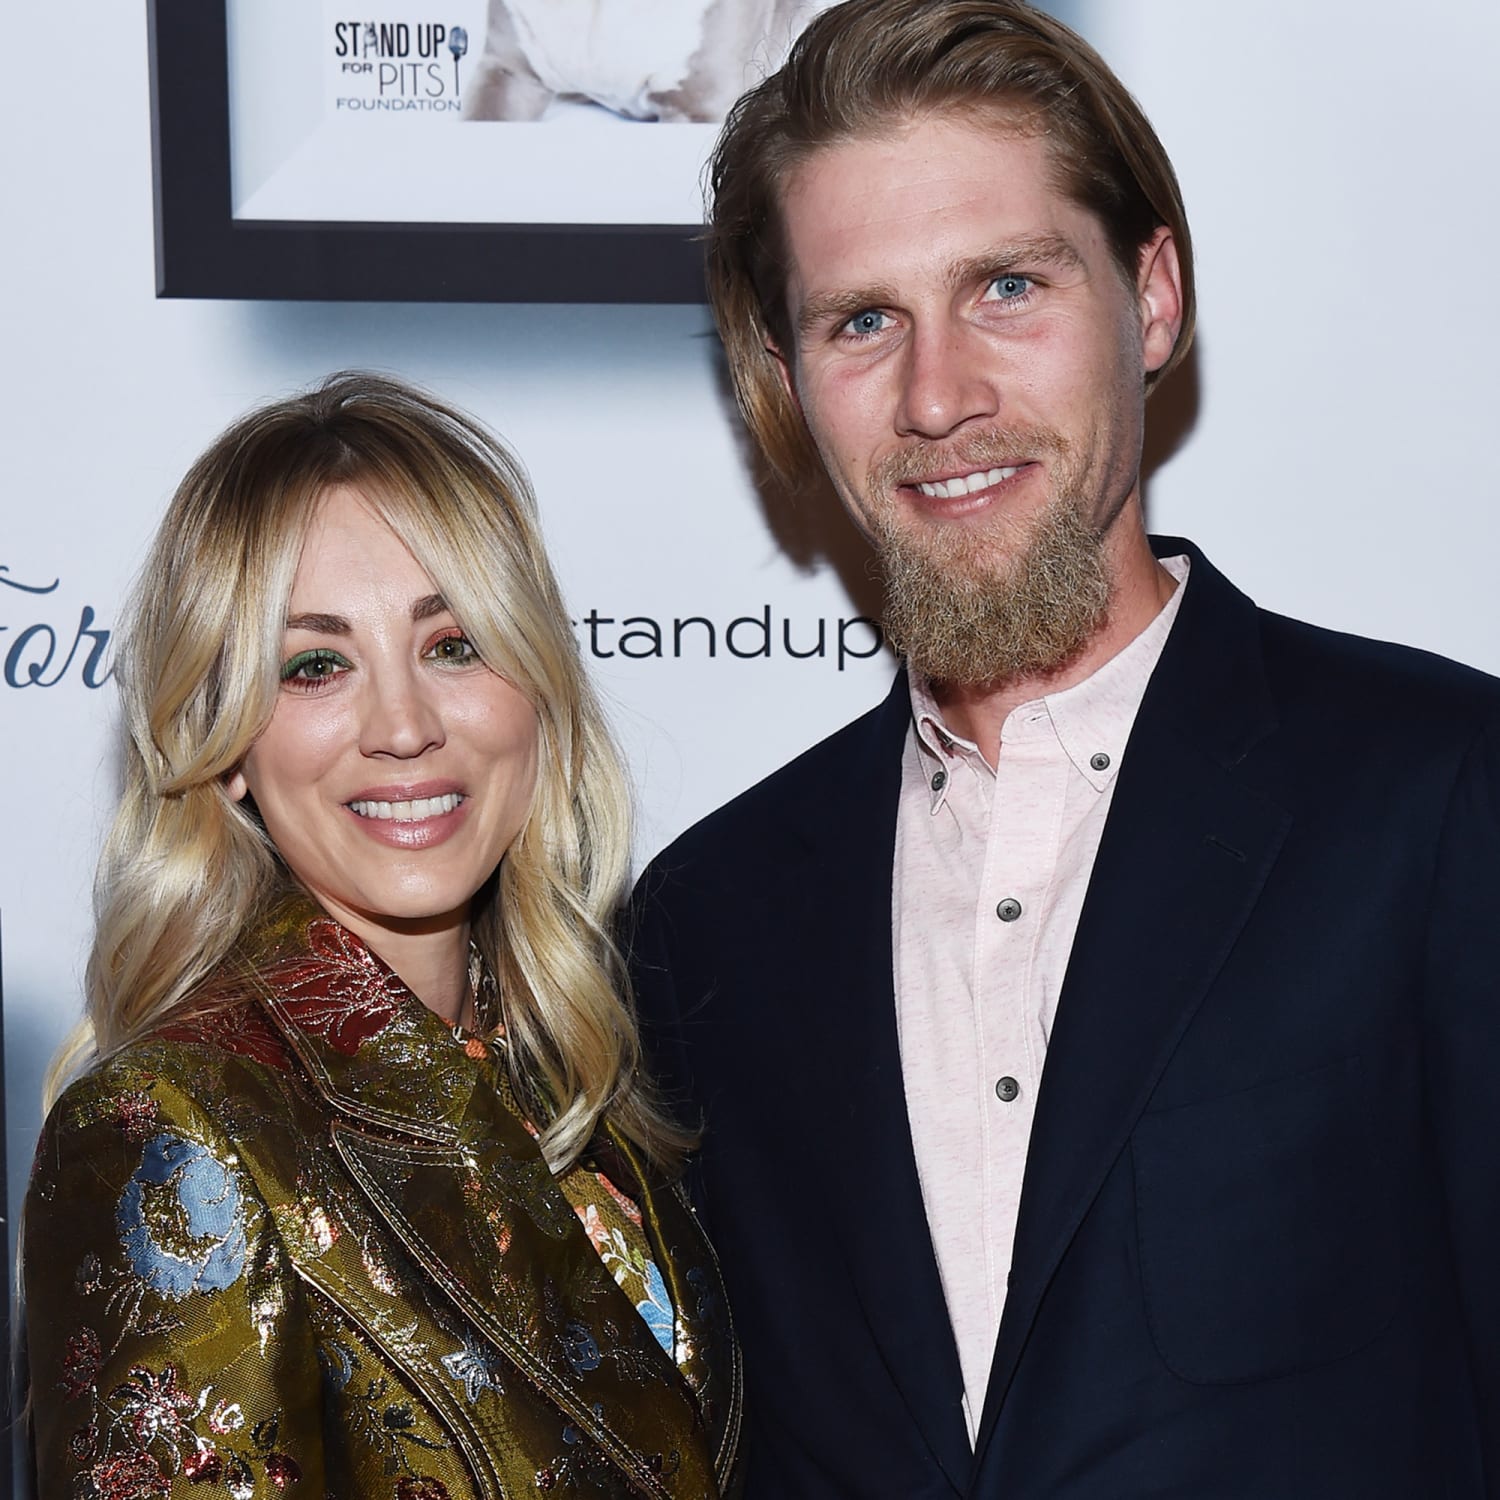 Kaley Cuoco and husband are finally moving in together this spring